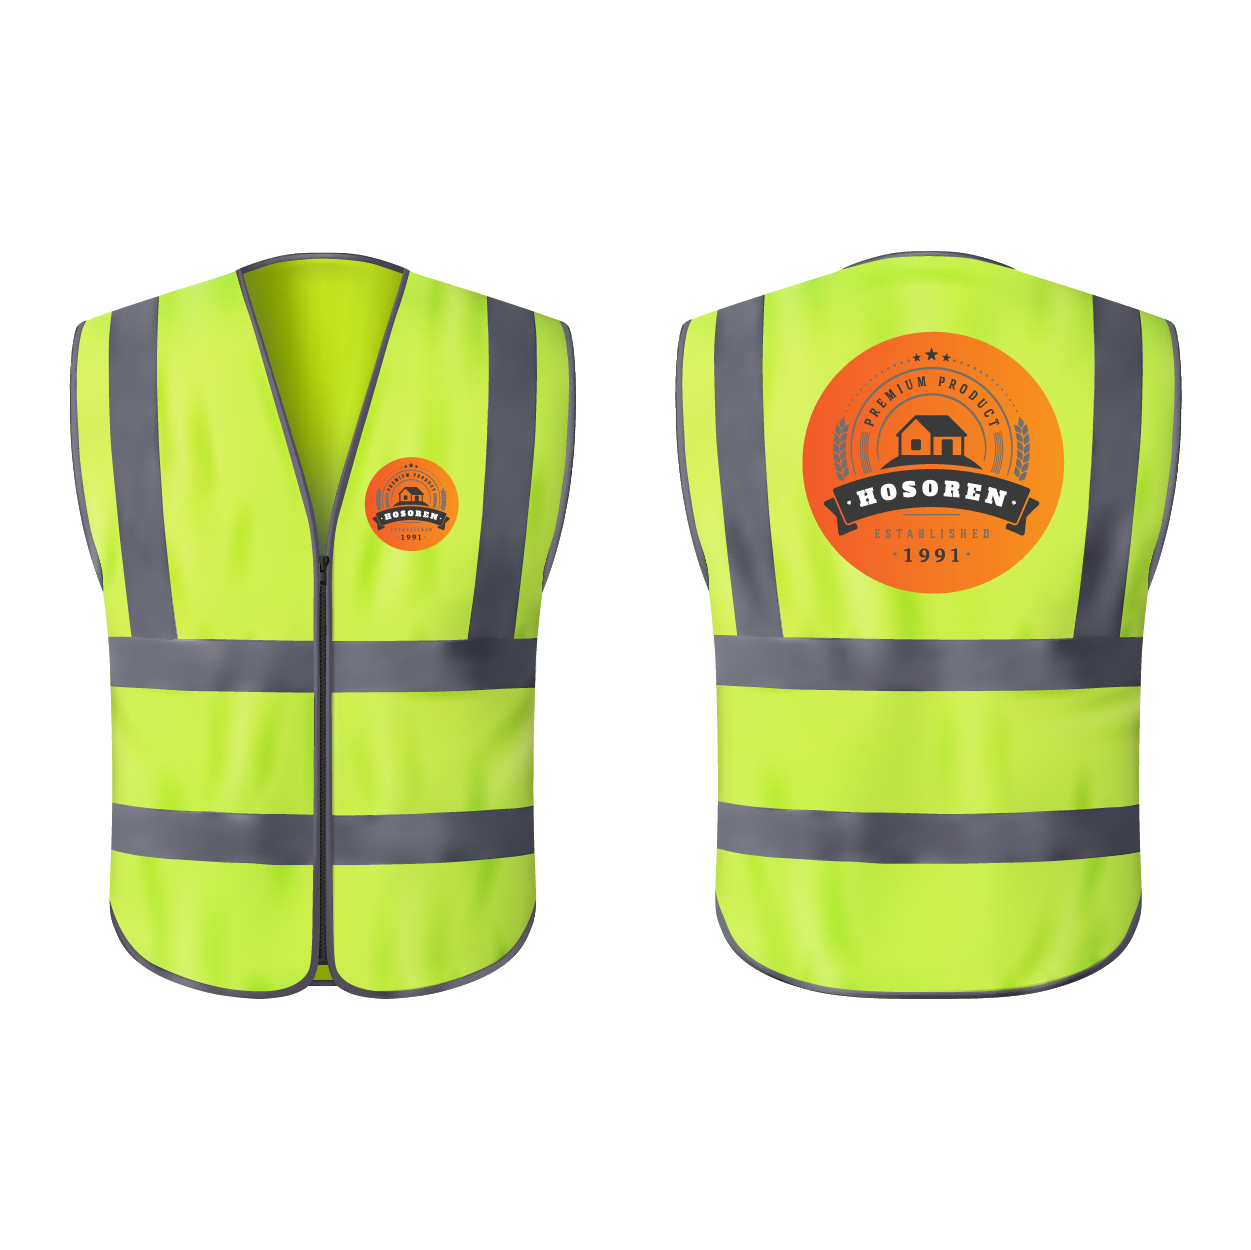 Full colour Safety wear